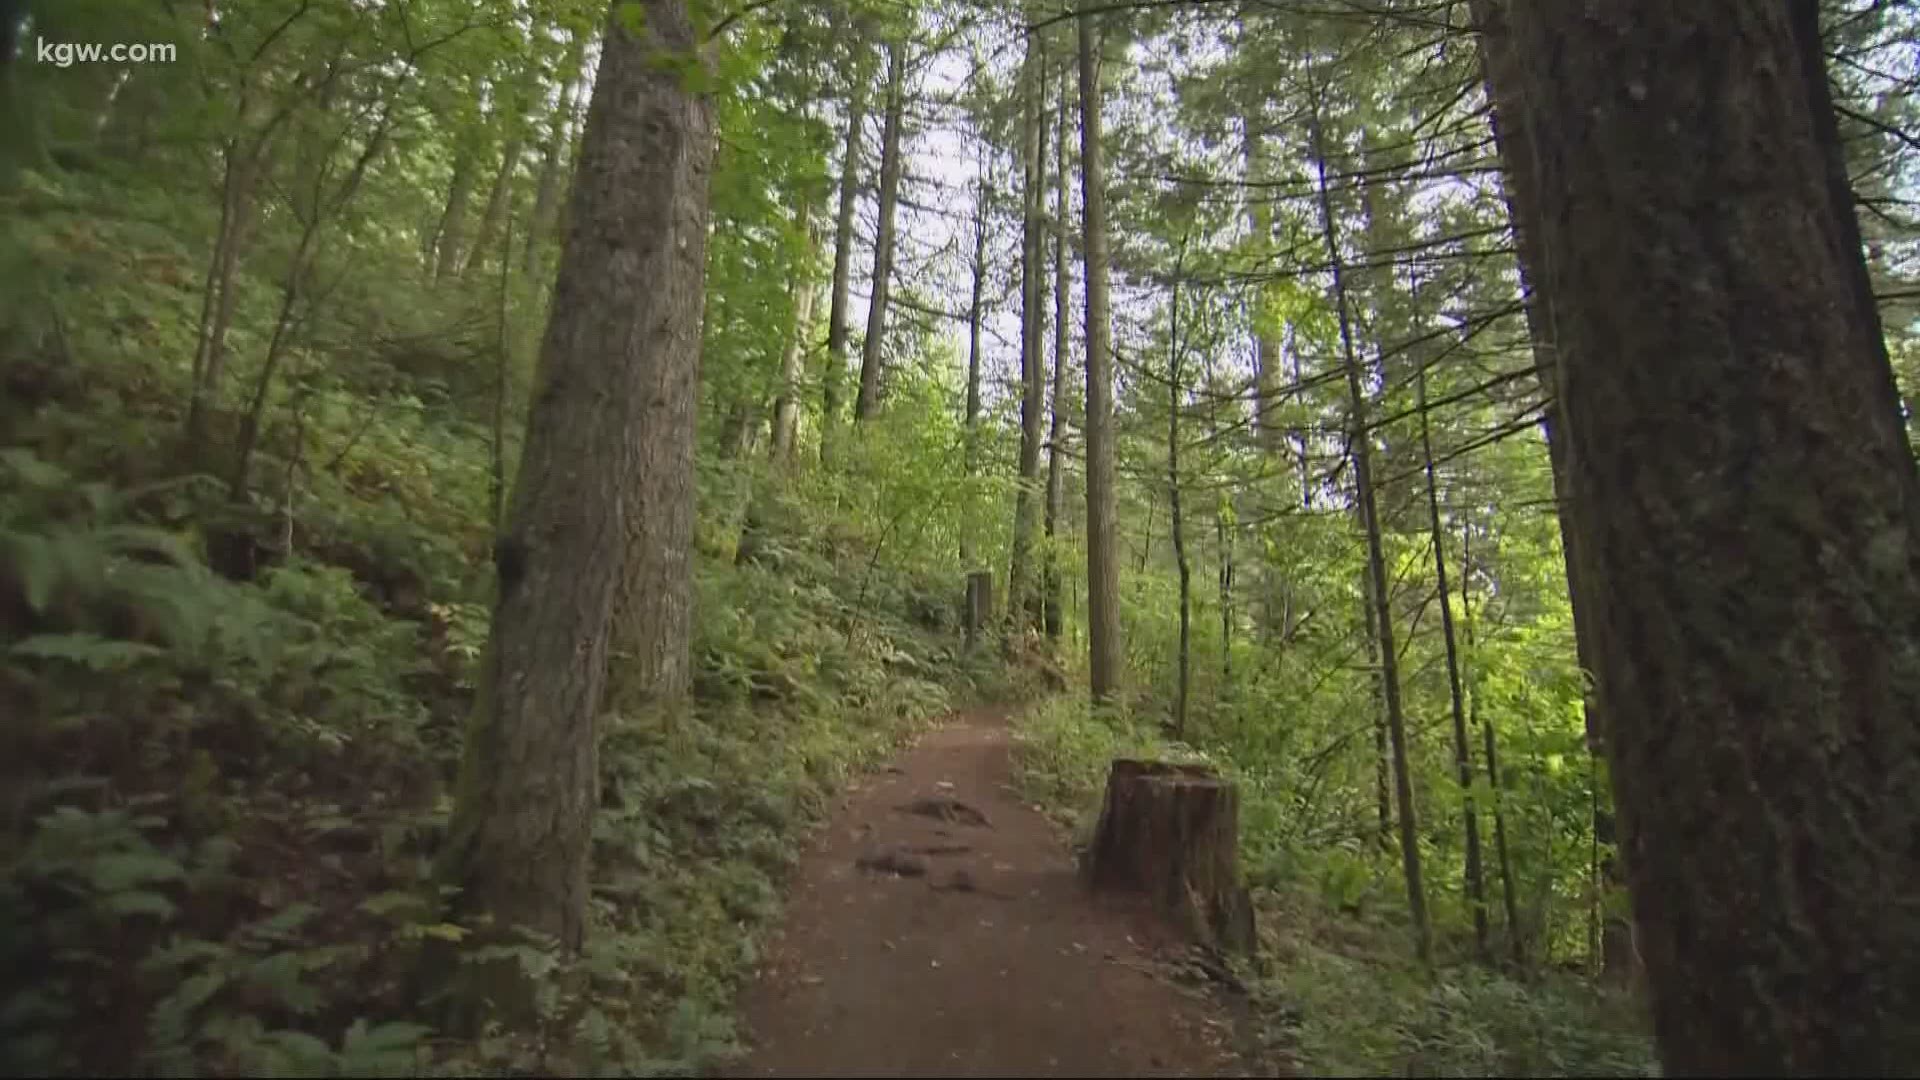 It's important to have a safe Labor Day weekend and if you plan to hike in the Gorge, experts say to do so carefully.